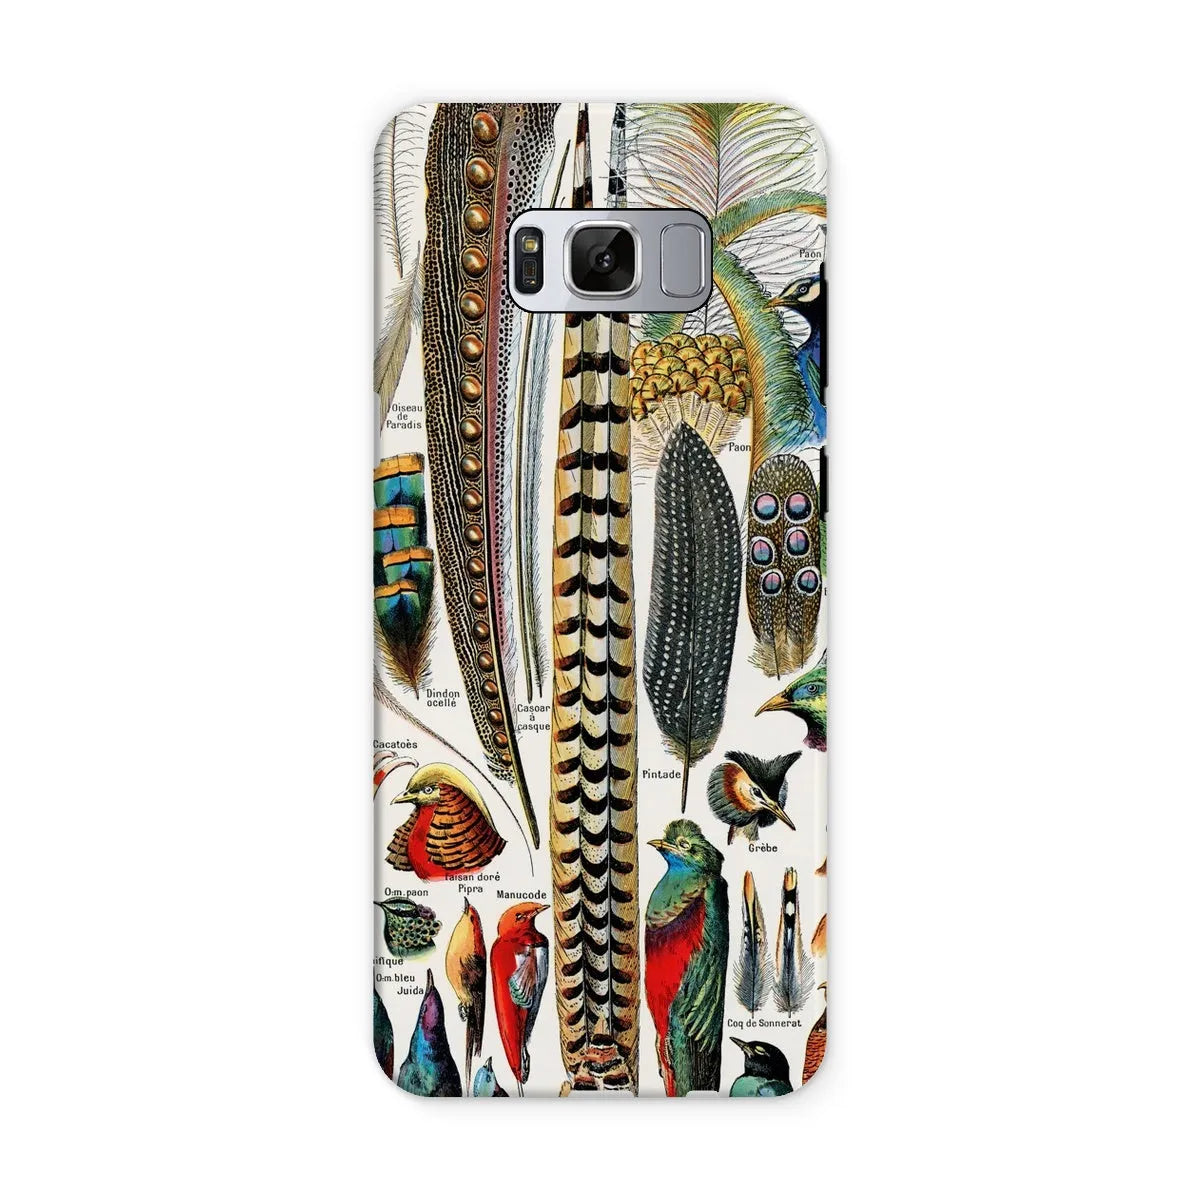 Plumes - Feathers - Adolphe Millot Tough Phone Case - Samsung Galaxy S8 / Matte - Mobile Phone Cases - Aesthetic Art